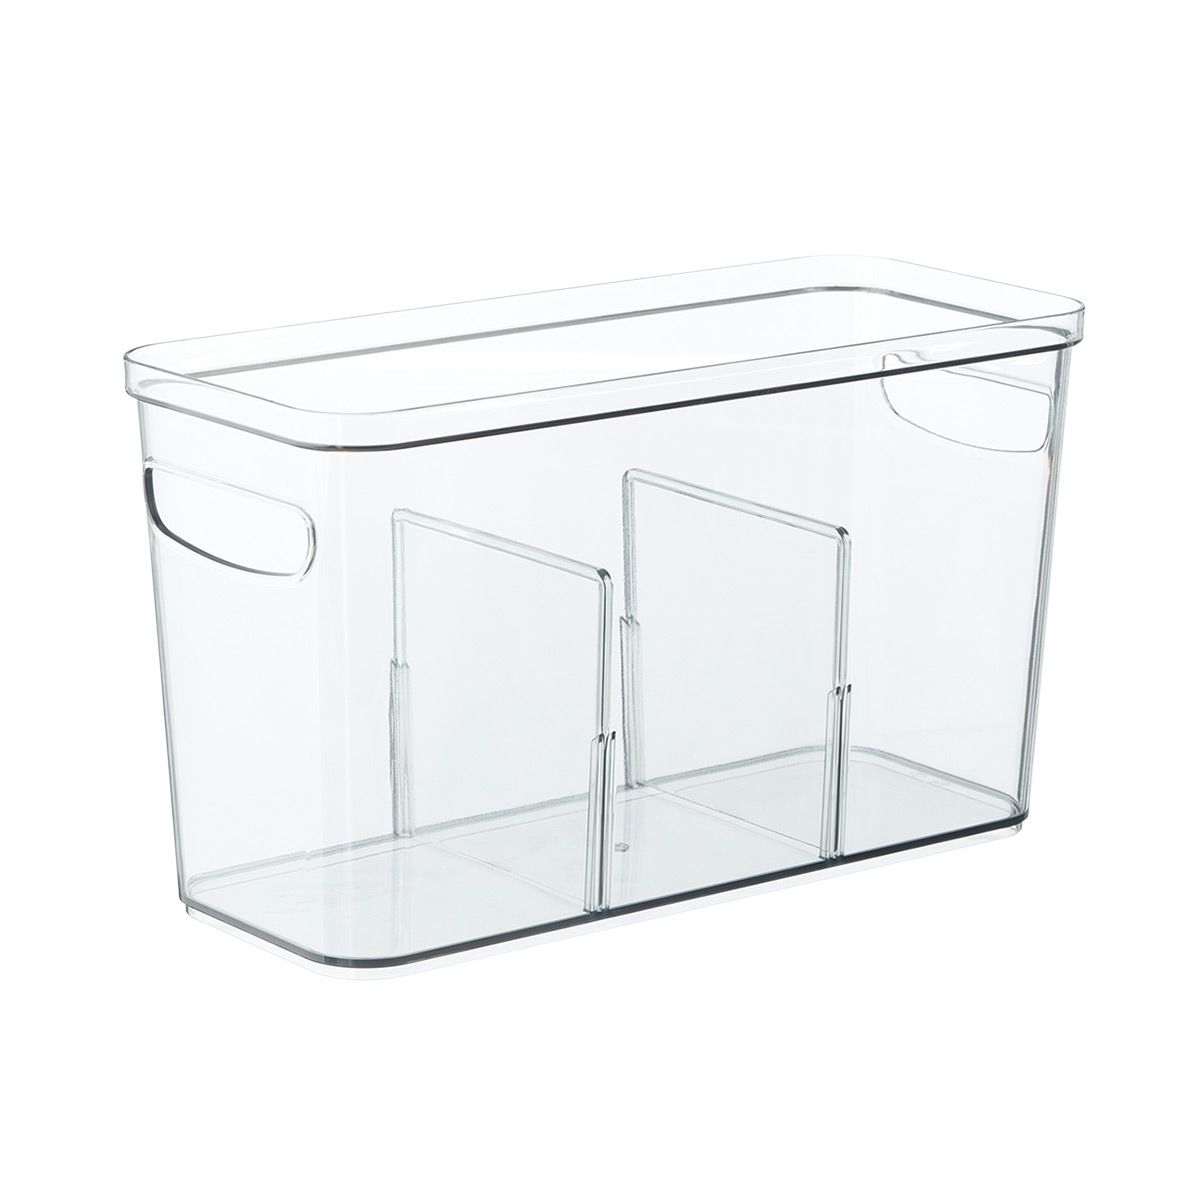 Rosanna Pansino x iD Narrow Bin w/ Removable Dividers Clear | The Container Store